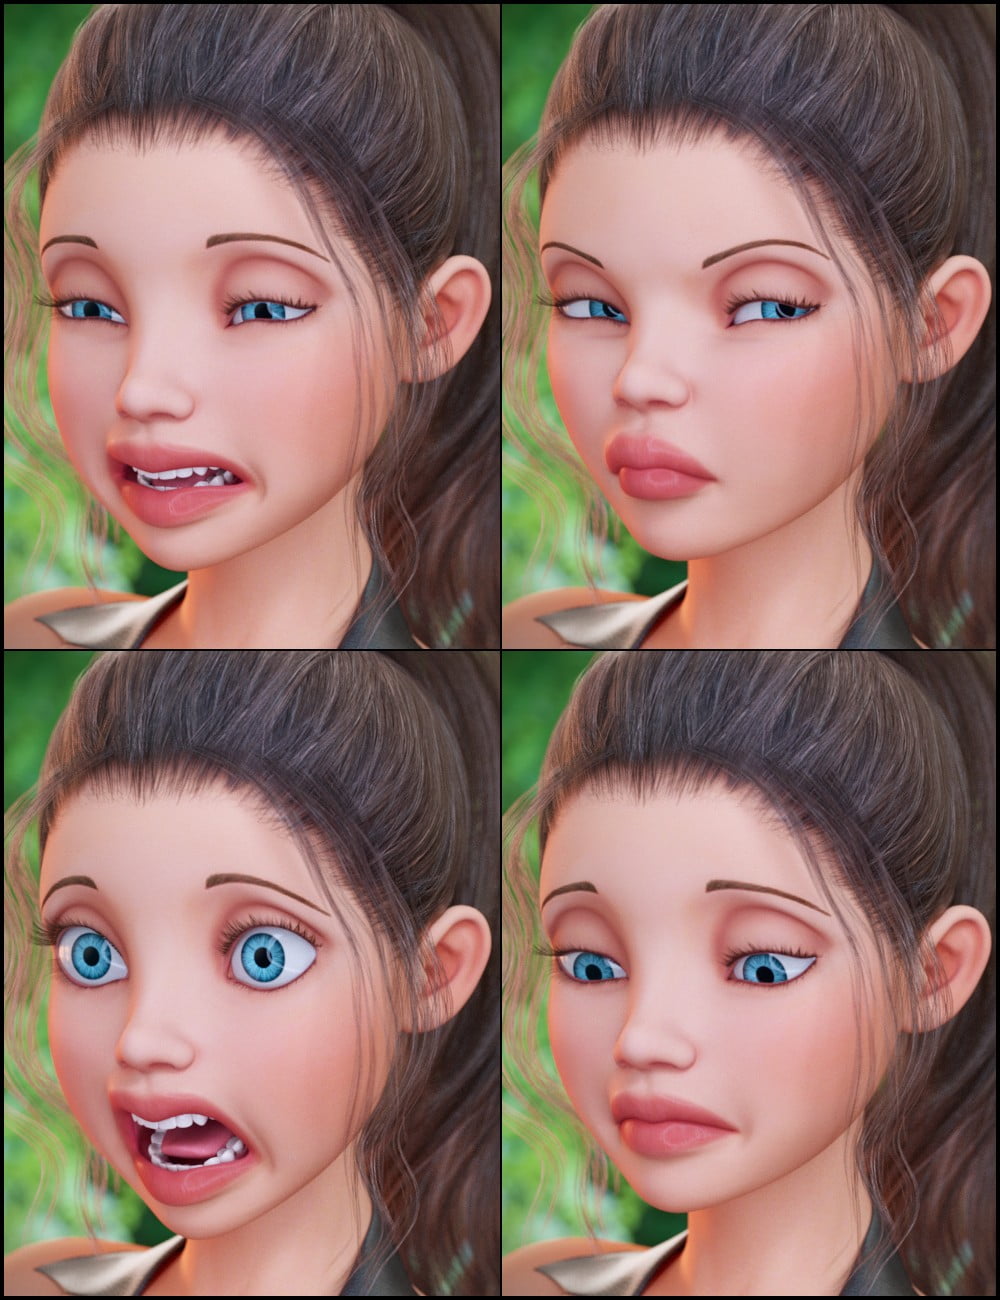 02-daz3d_capsces-tooned-expressions-for-the-girl-7